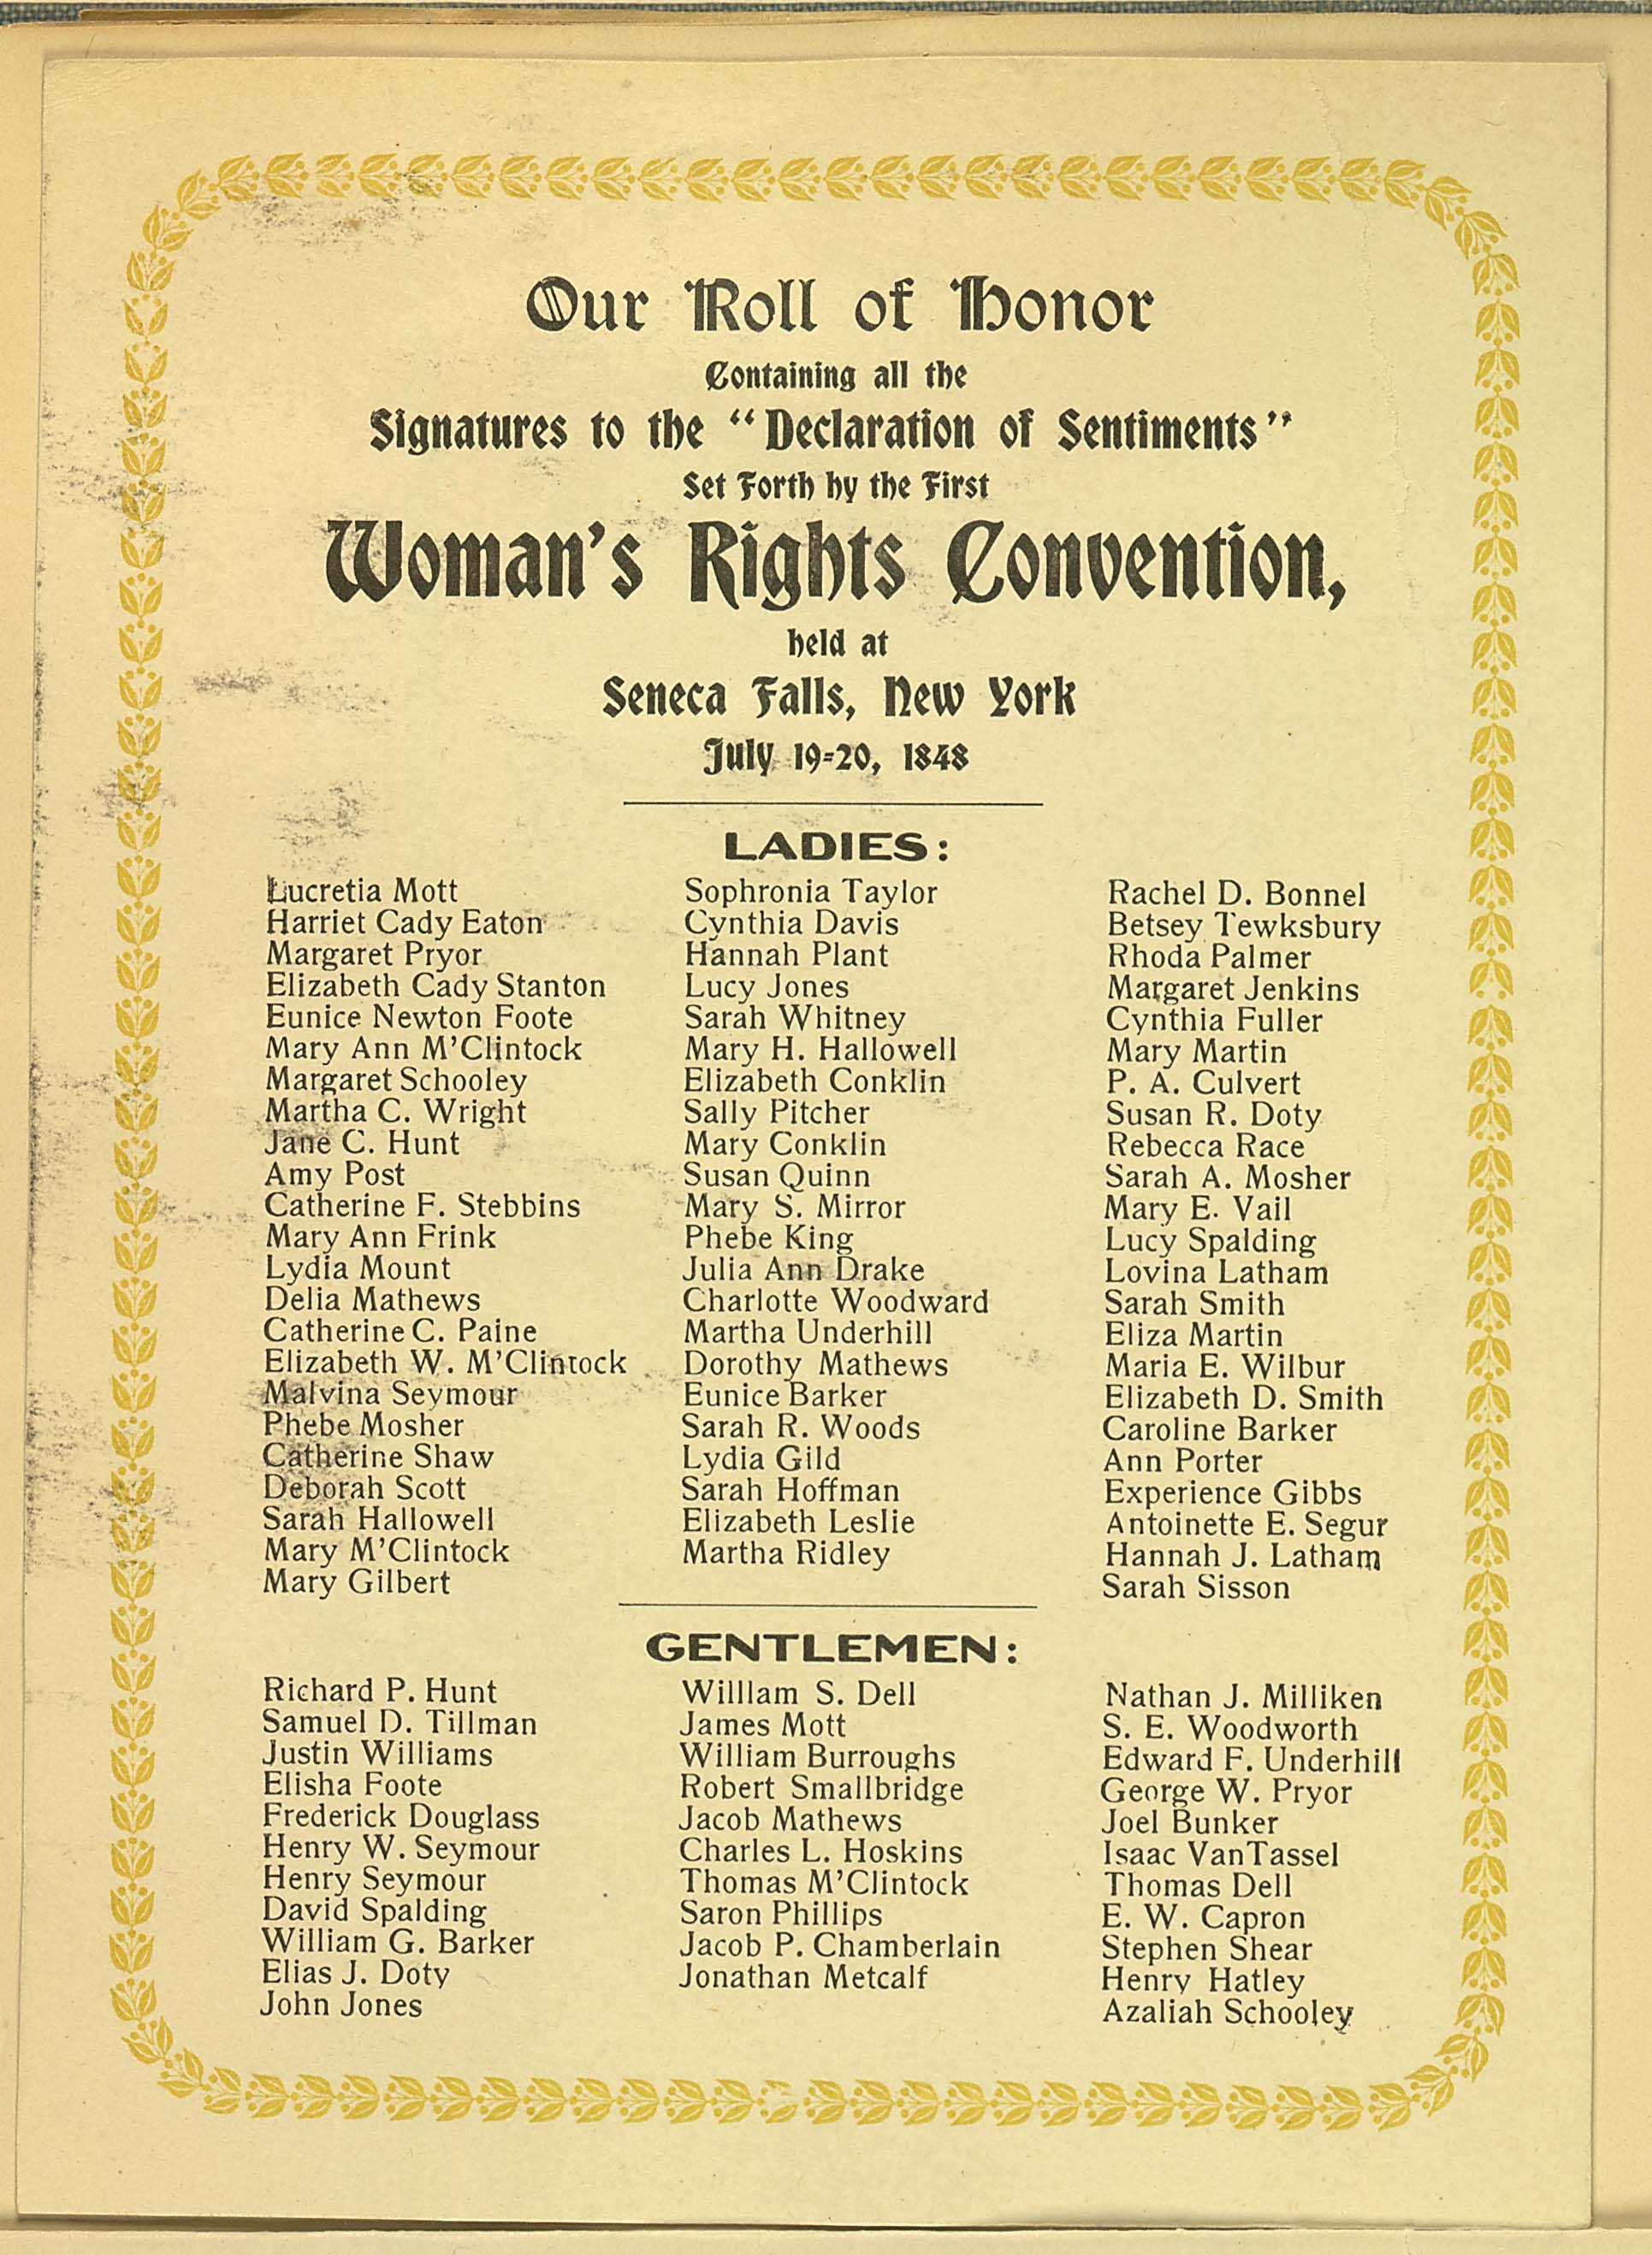 Declaration of Sentiments: The First Women's Rights Convention (U.S.  National Park Service)